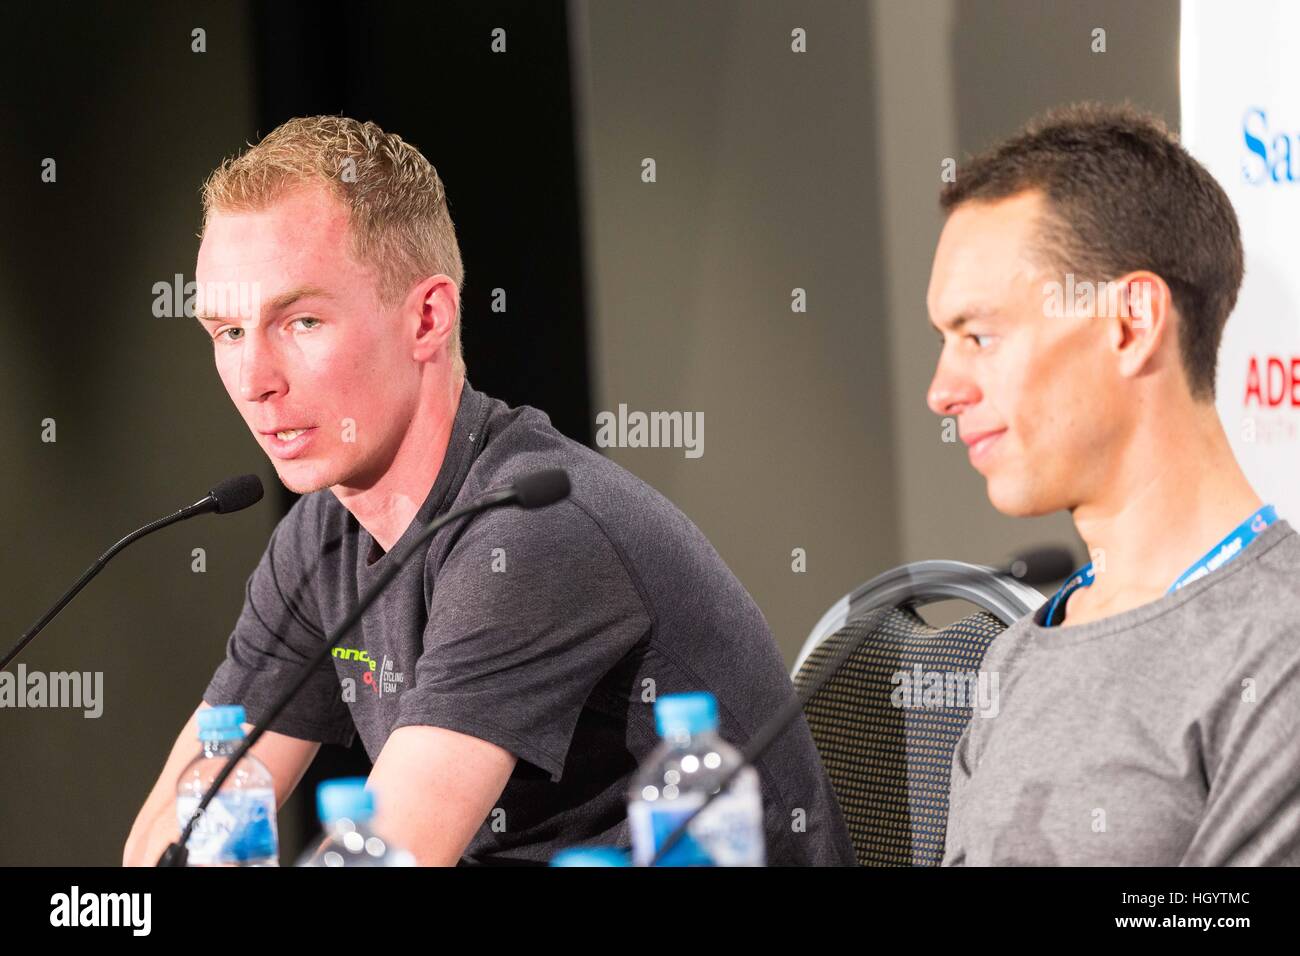 Adelaide, Australia. 7th Jan, 2017. Media Conference with (R-L) Richie Porte (BMC Racing Team), Tom-Jelte Slagter (Cannondale - Drapac Pro Cycling Team), Tour Down Under, Australia.  © Gary Francis/ZUMA Wire/Alamy Live News Stock Photo